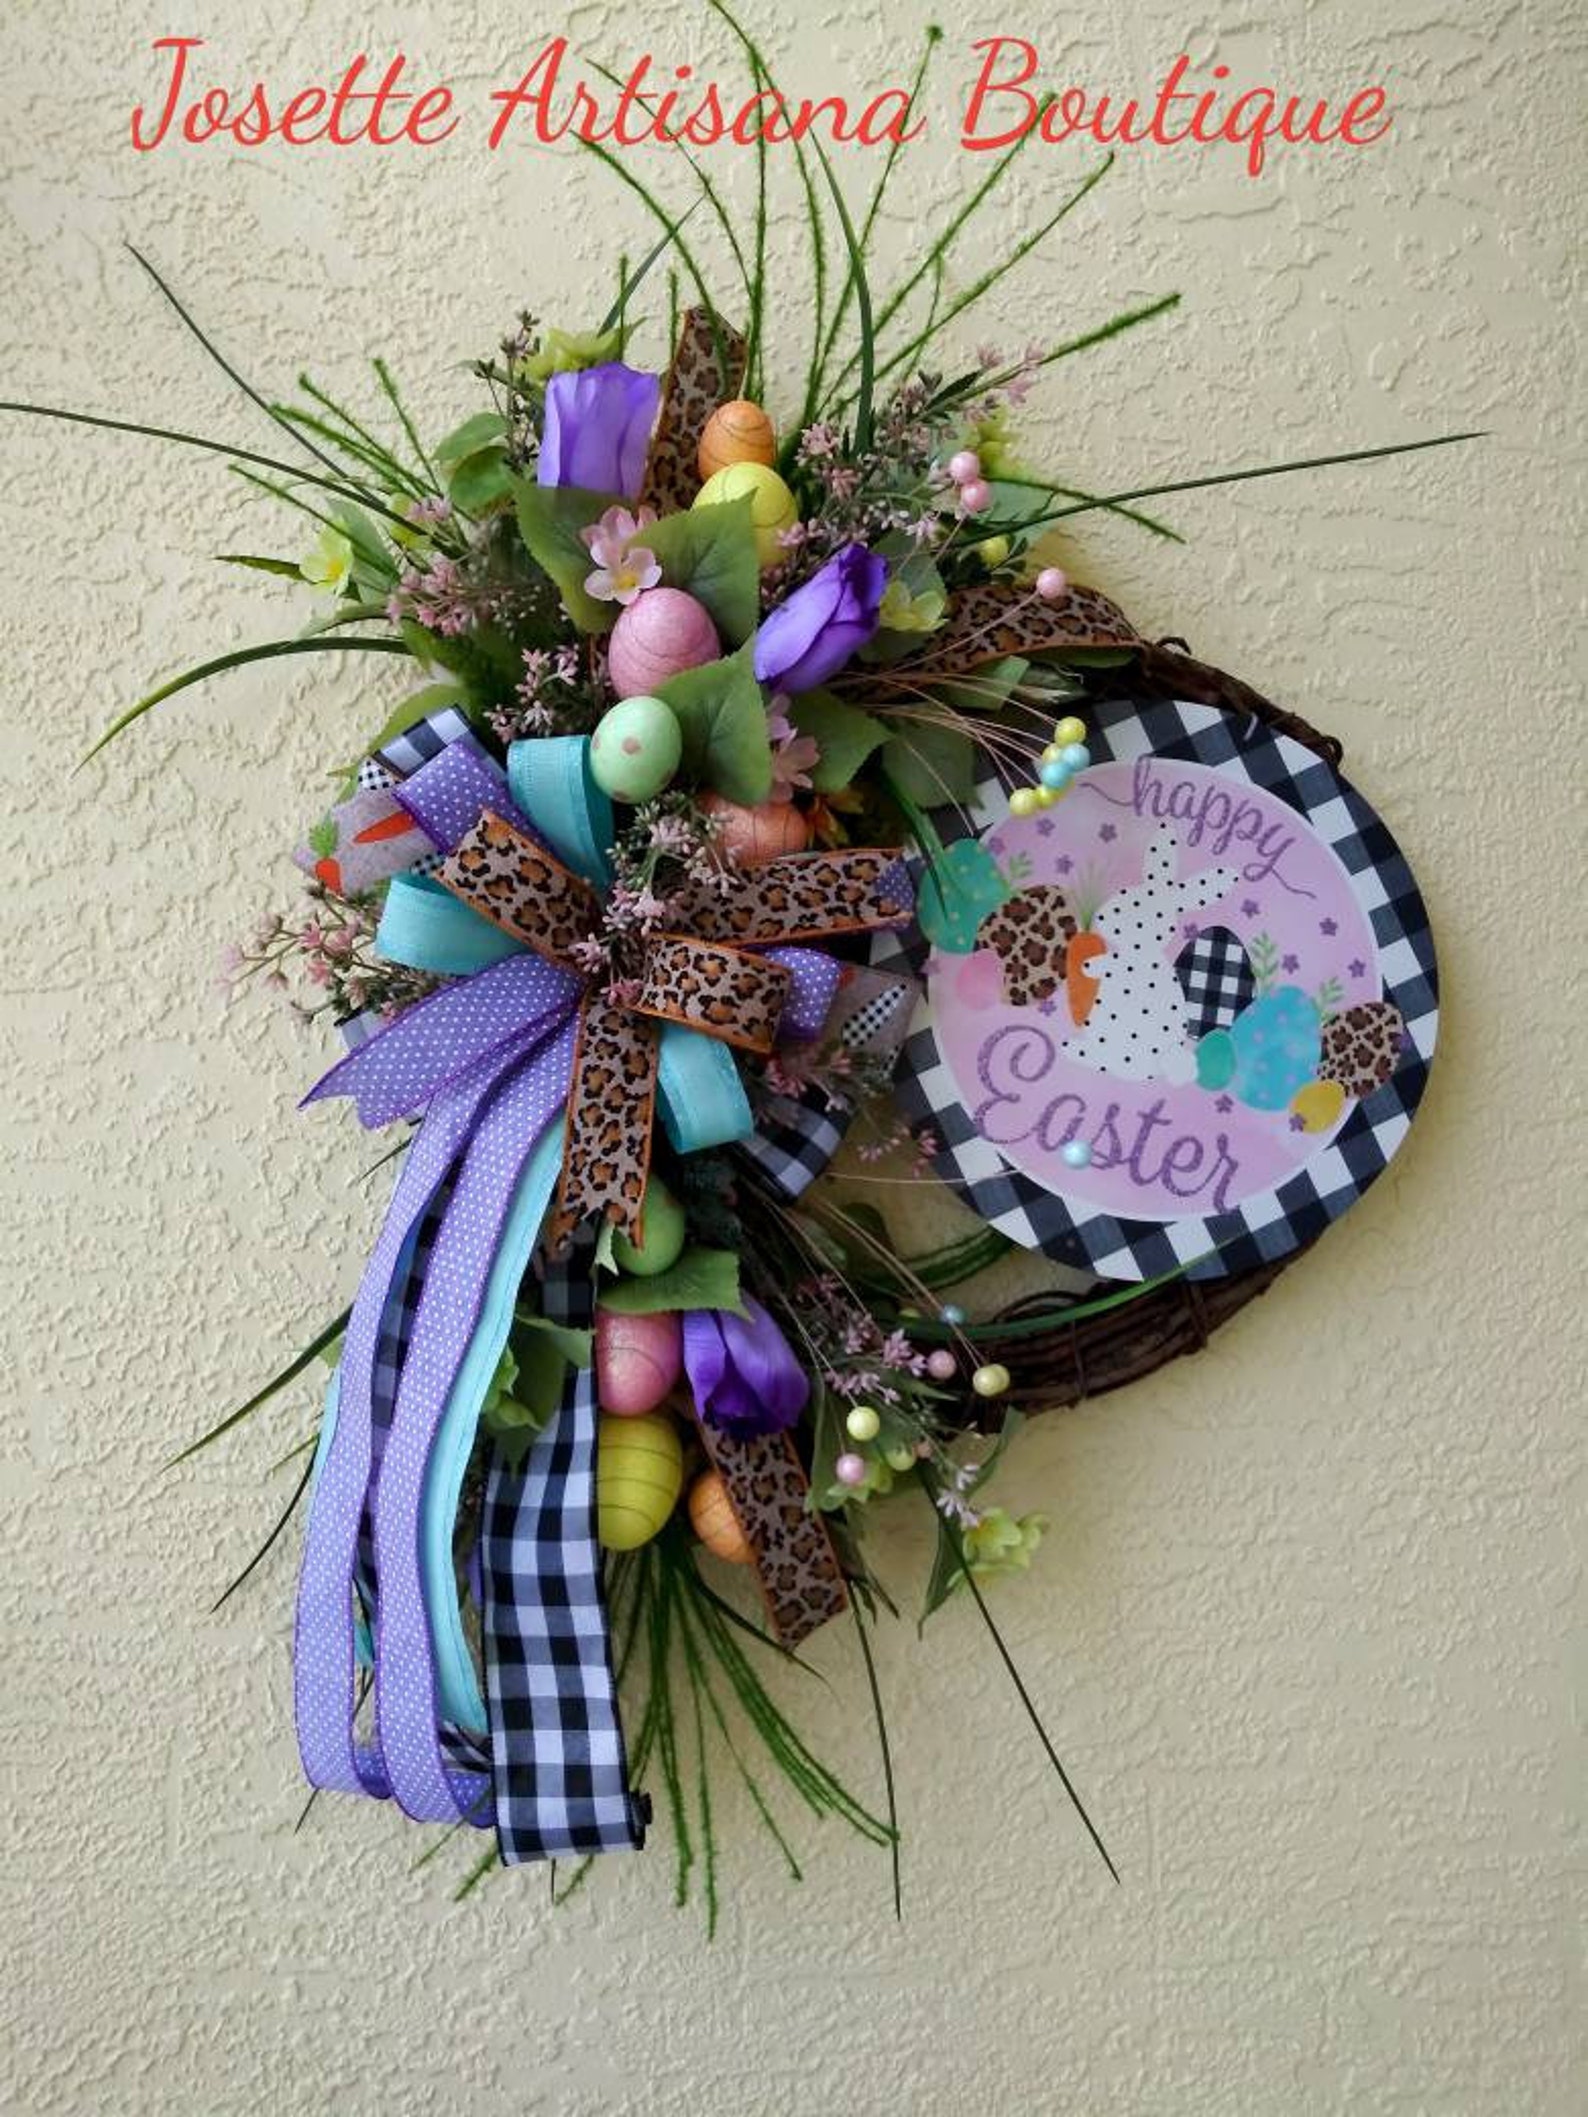 Partially Covered Happy Easter Bunny Grapevine Wreaths with Flowers, Greenery, Eggs and Twig Berries